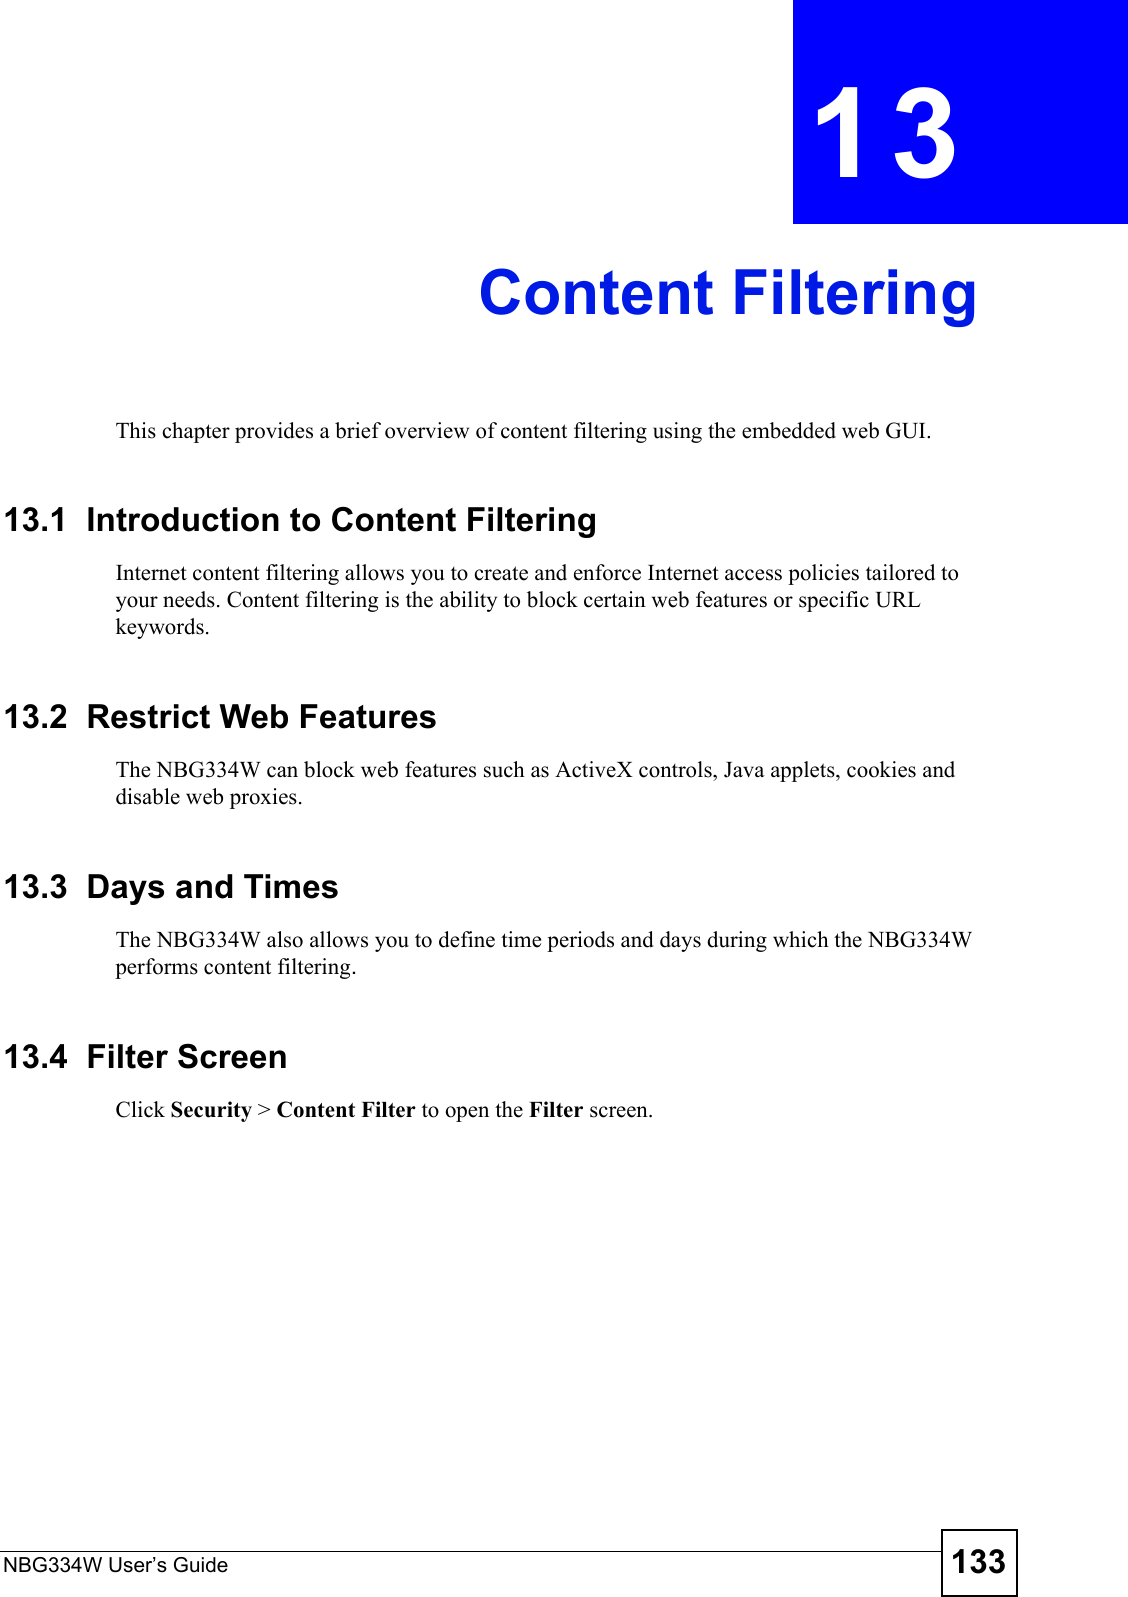 NBG334W User’s Guide 133CHAPTER  13 Content FilteringThis chapter provides a brief overview of content filtering using the embedded web GUI.13.1  Introduction to Content FilteringInternet content filtering allows you to create and enforce Internet access policies tailored to your needs. Content filtering is the ability to block certain web features or specific URL keywords.13.2  Restrict Web FeaturesThe NBG334W can block web features such as ActiveX controls, Java applets, cookies and disable web proxies. 13.3  Days and TimesThe NBG334W also allows you to define time periods and days during which the NBG334W performs content filtering.13.4  Filter ScreenClick Security &gt; Content Filter to open the Filter screen. 